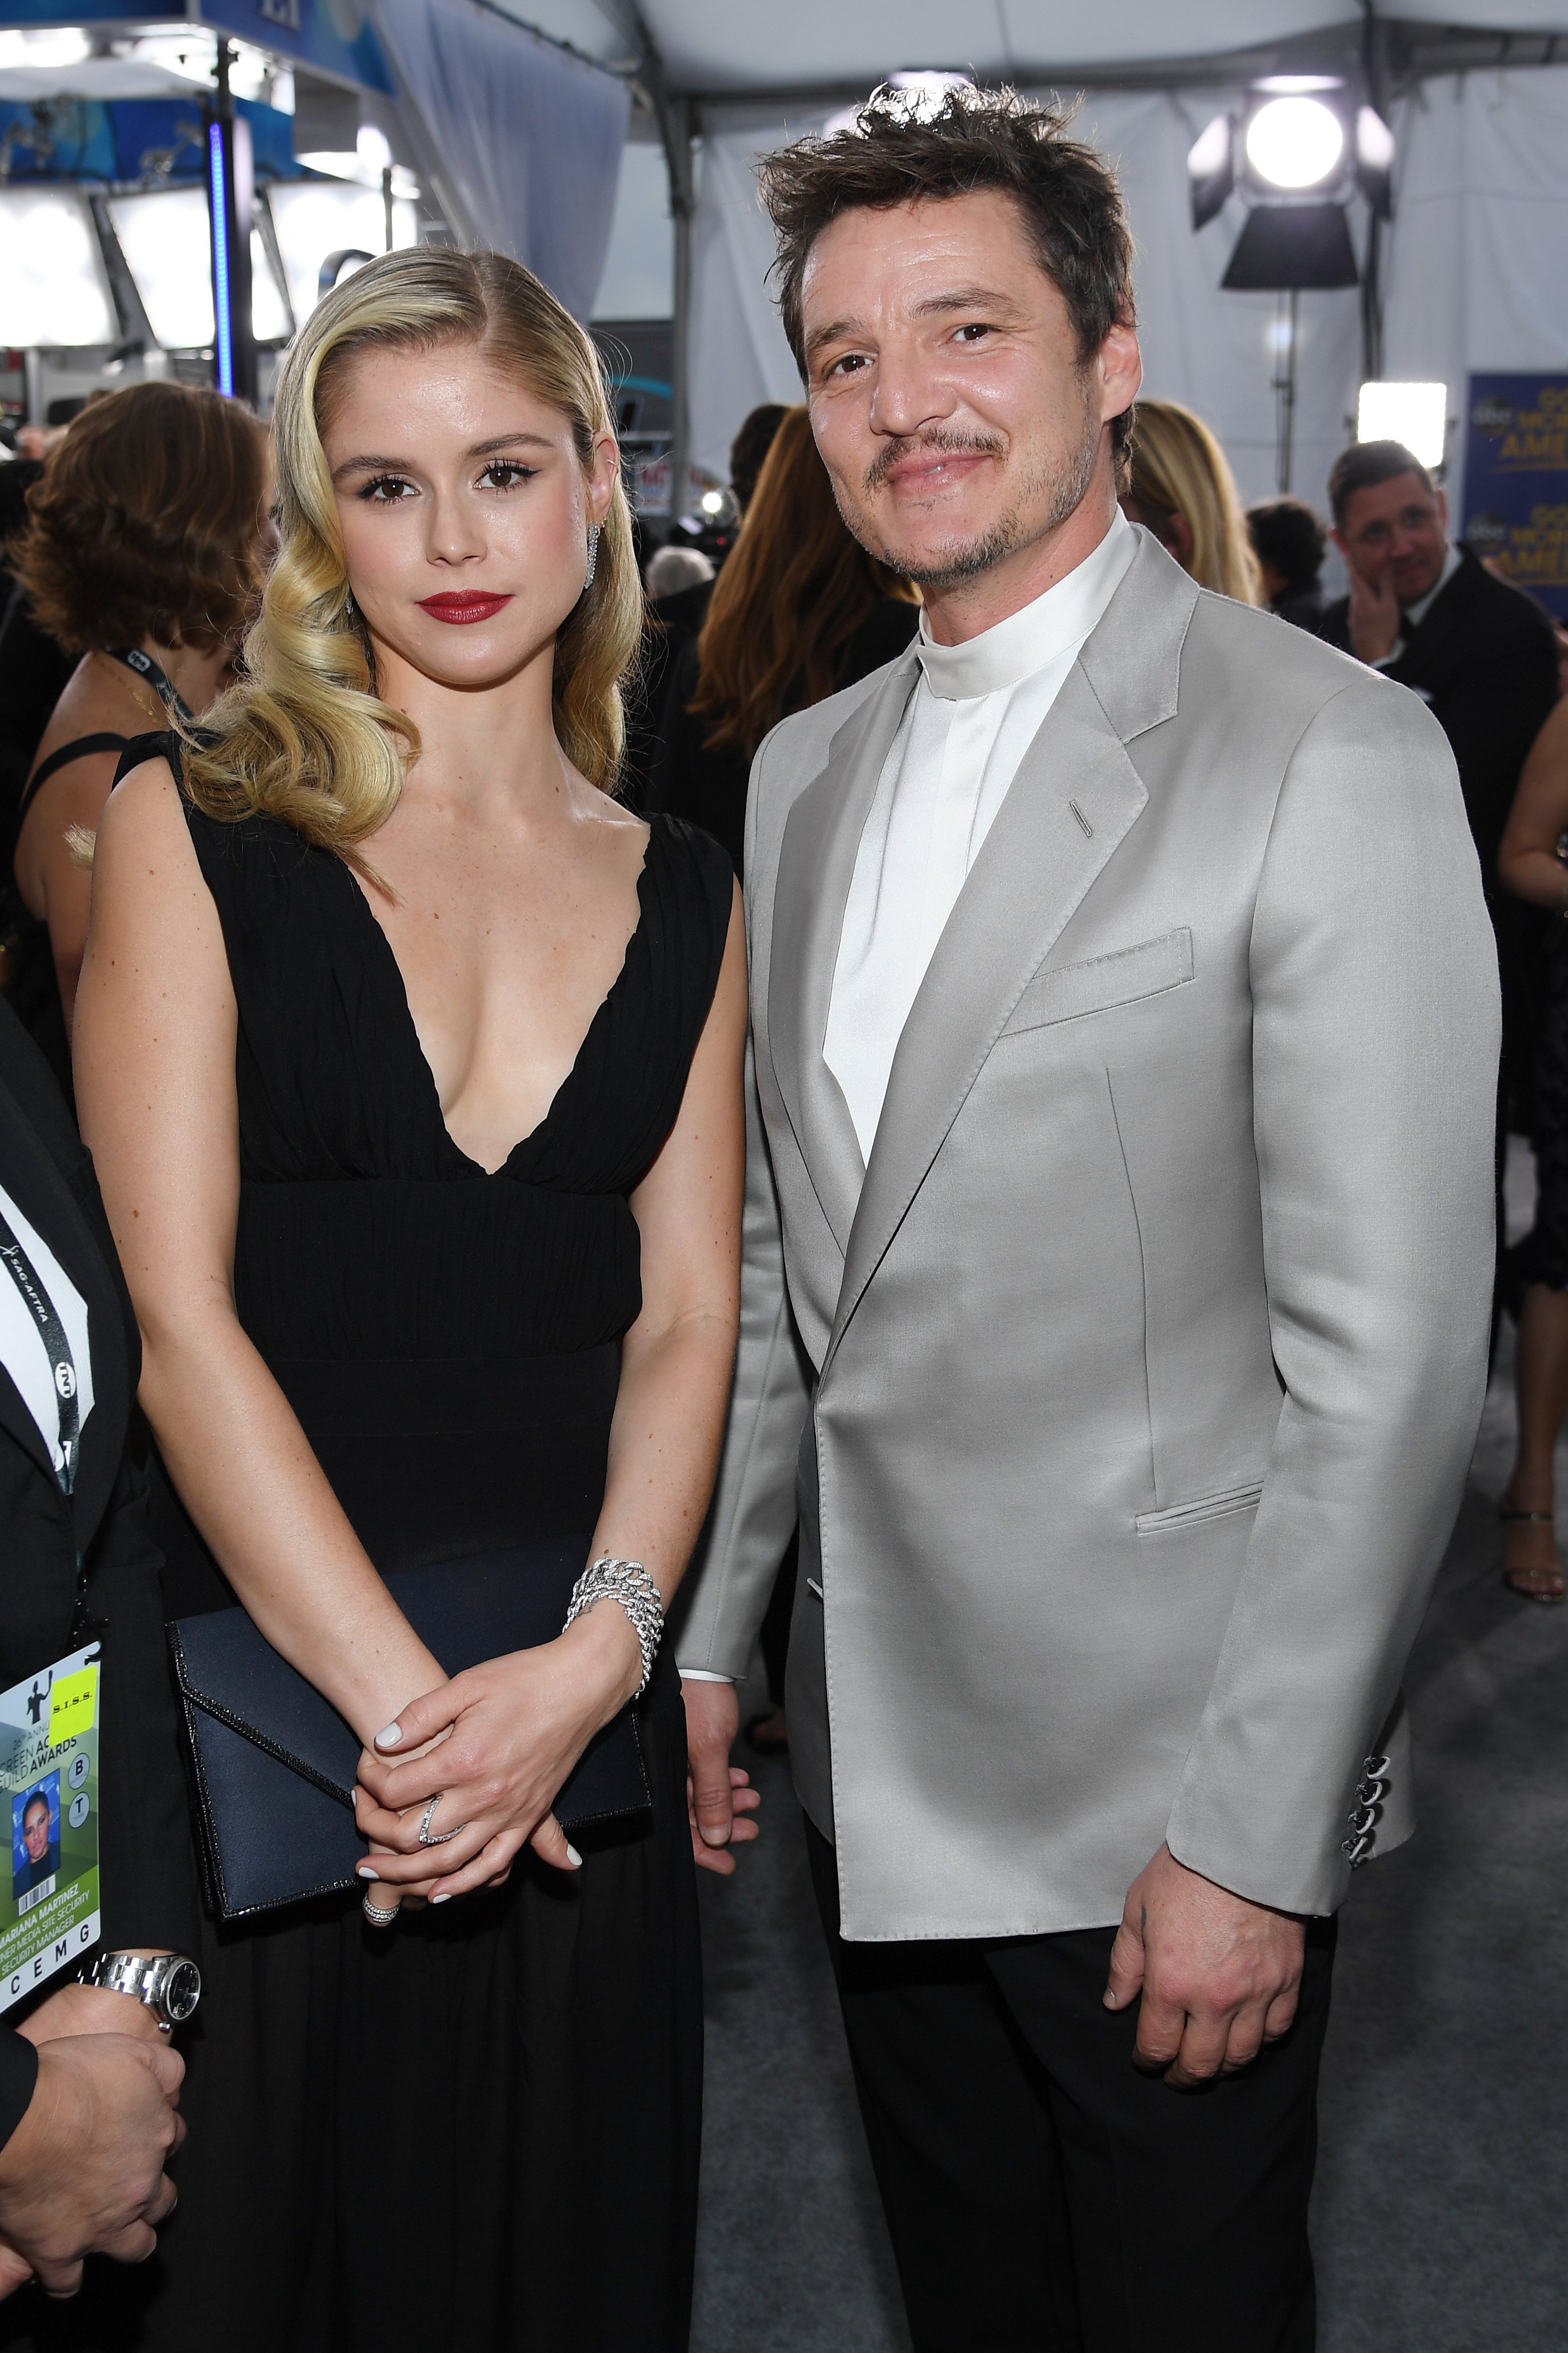 Erin Moriarty and Pedro Pascal at the 26th Annual Screen Actors Guild Awards in Los Angeles on January 19, 2020 | Source: Getty Images